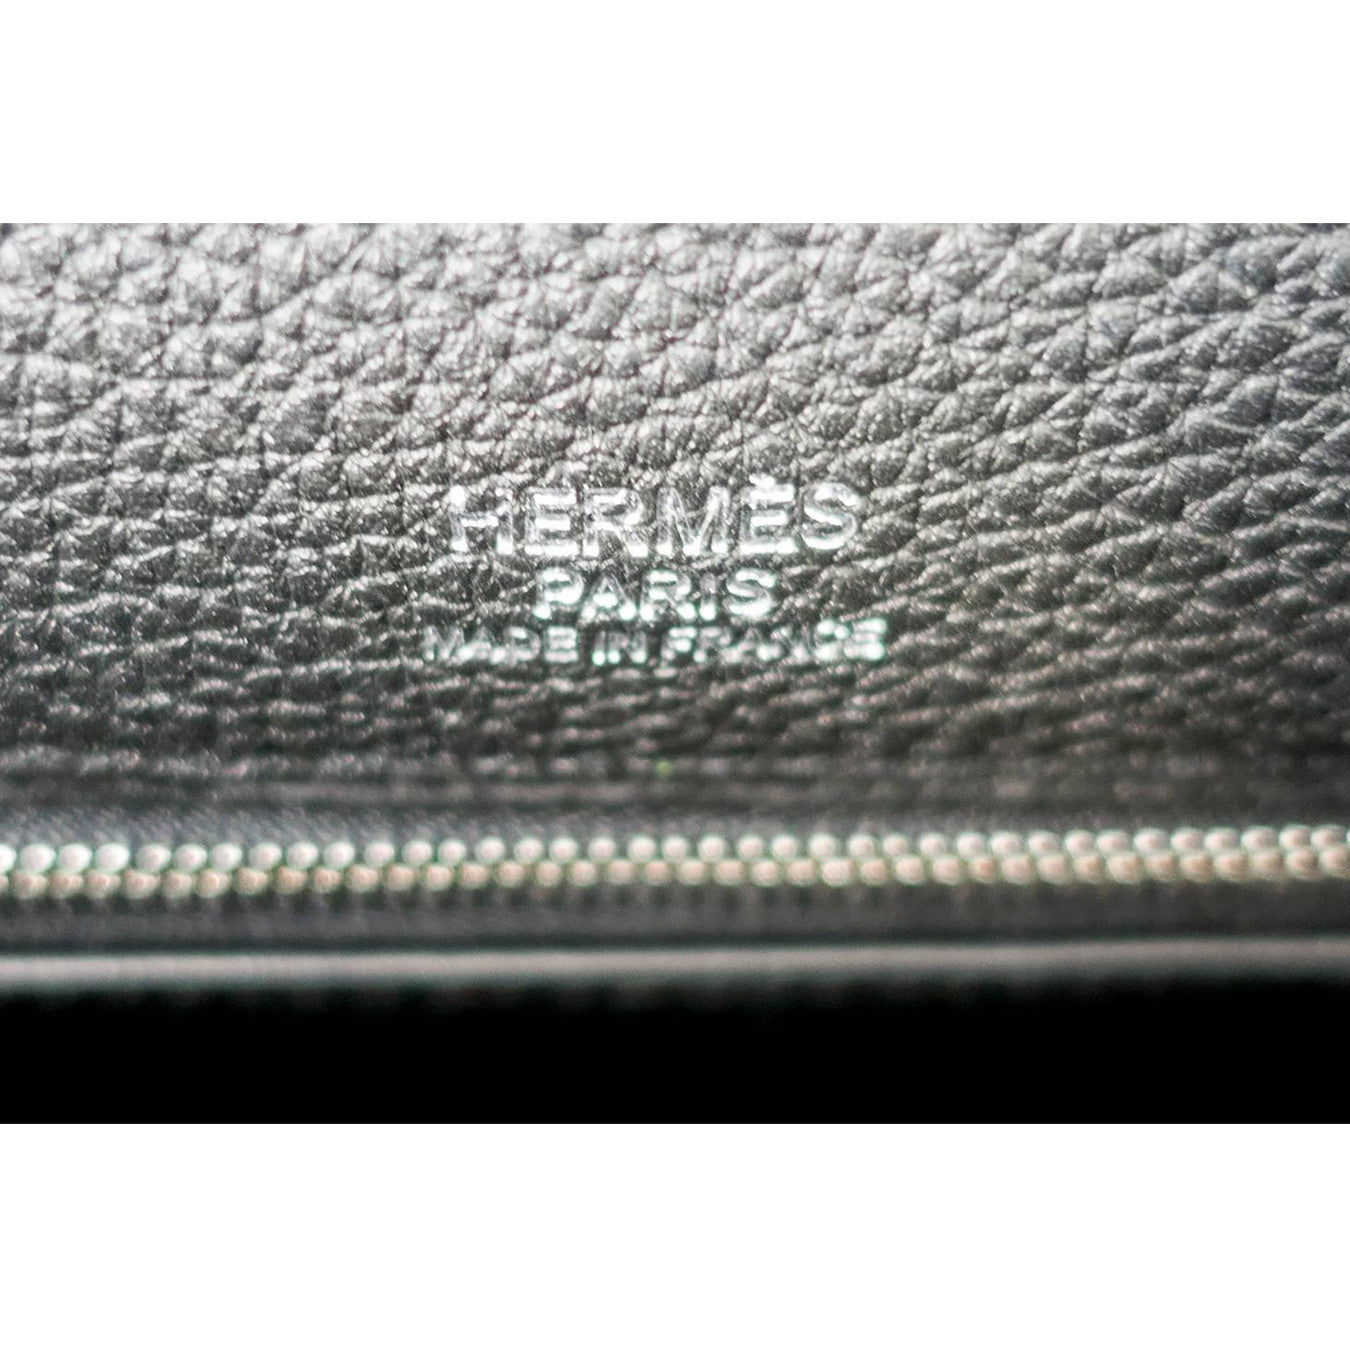 Hermes Black Ghillies Limited Edition 32cm Kelly Togo Swift